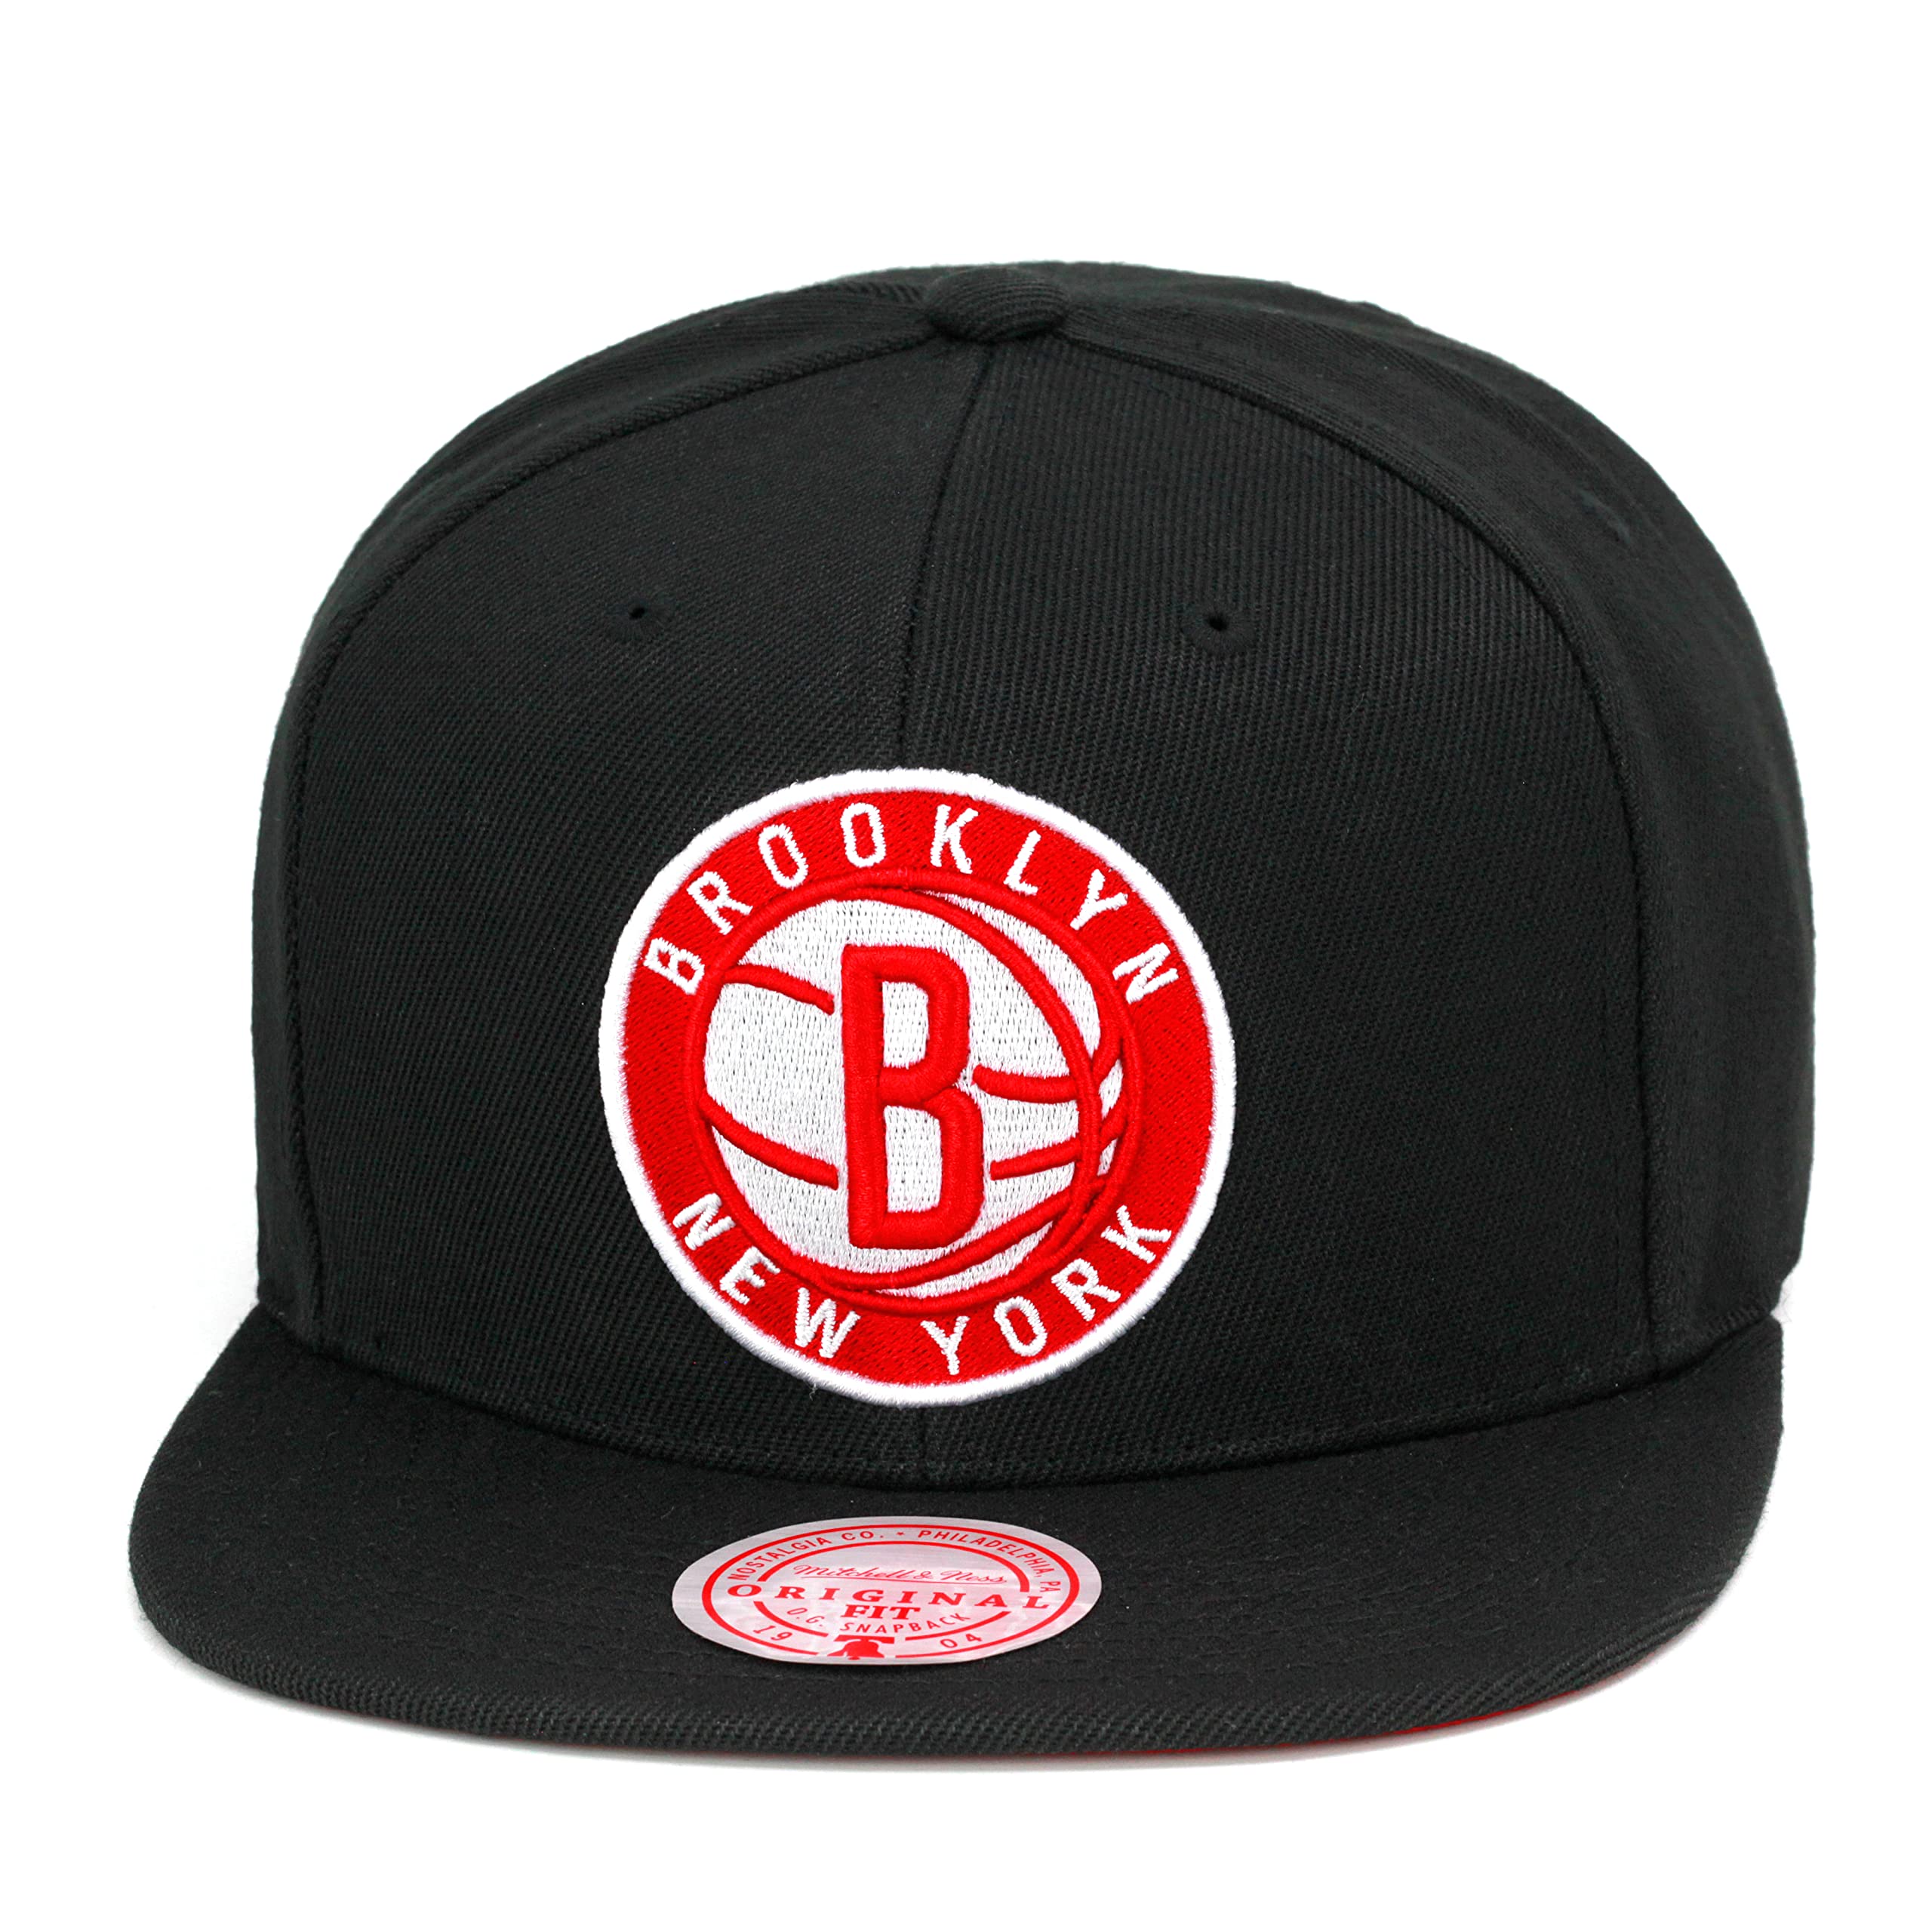 Mitchell & Ness Brooklyn Nets Snapback Hat Adjustable Cap - Black/Red/White/Retro 11 Playoffs Bred - Caps Fitted Caps Fitted Mitchell & Ness